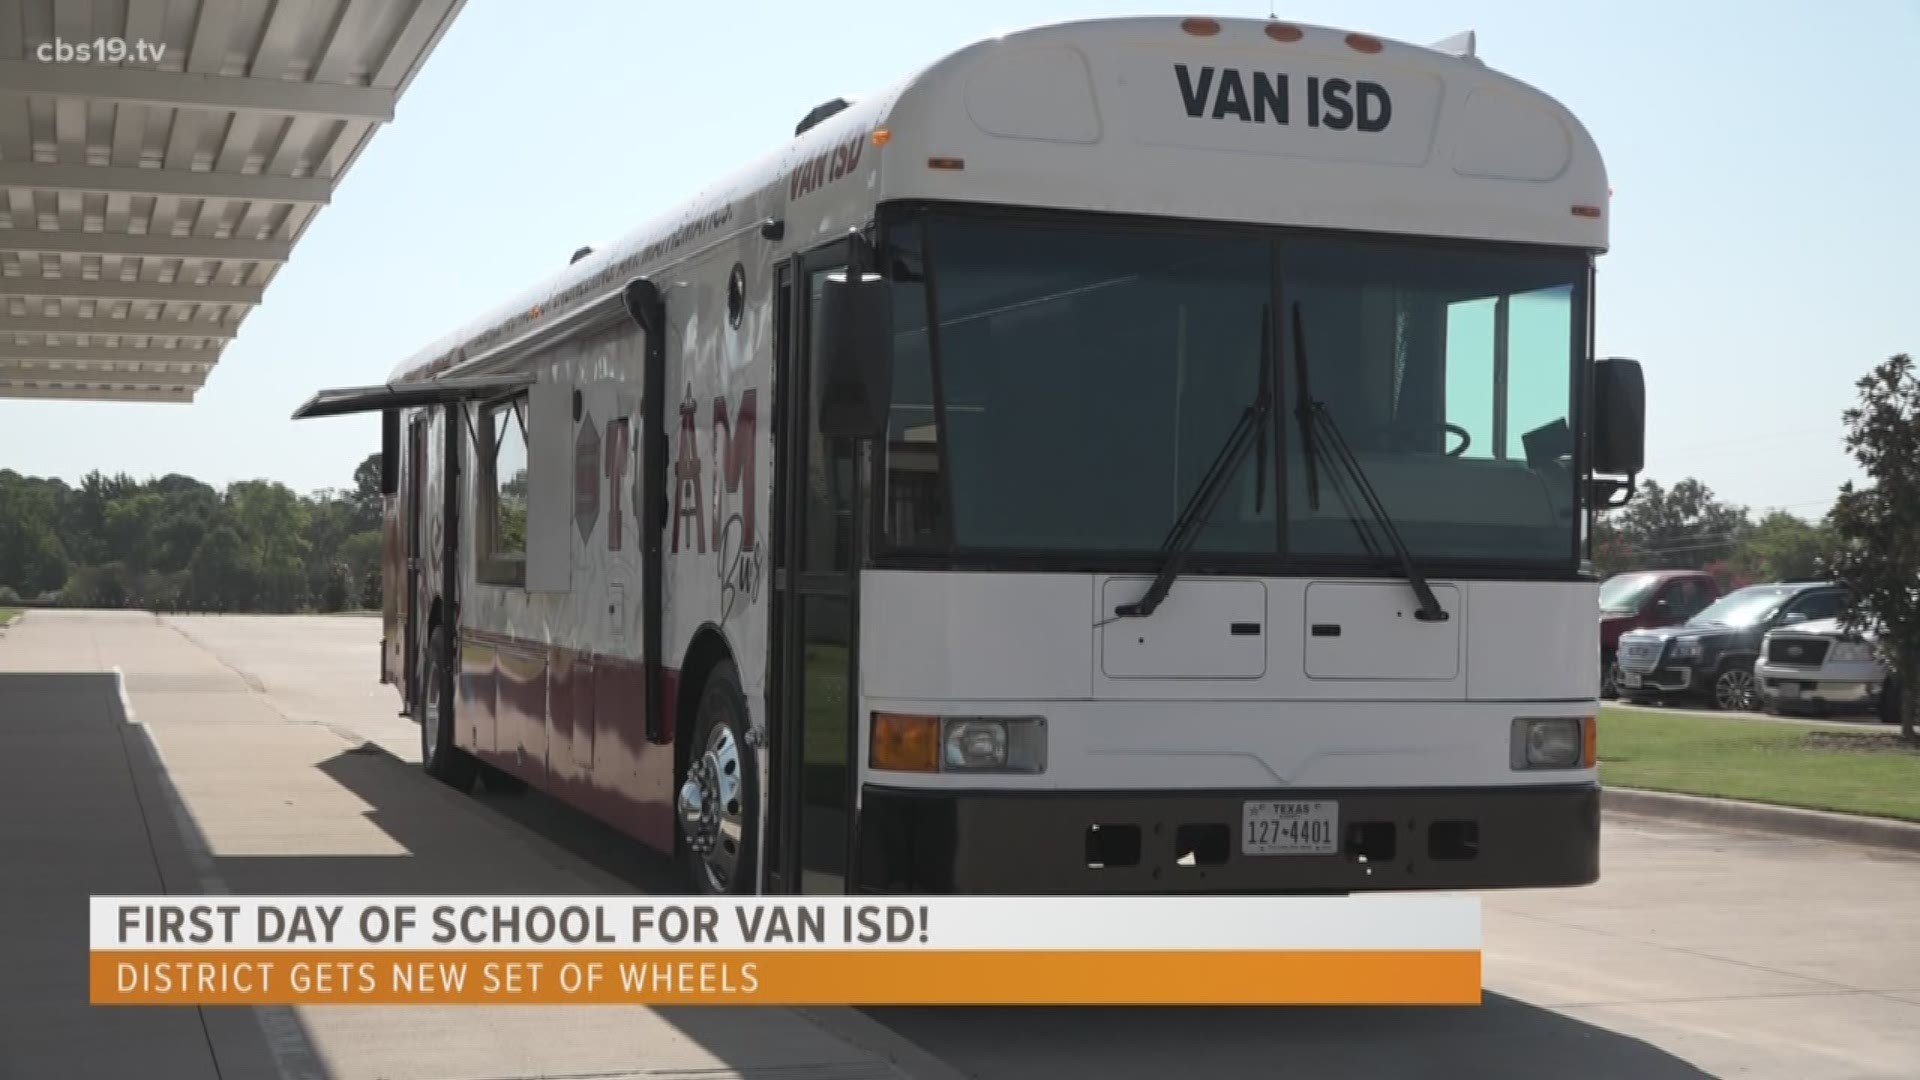 It's the first day of school for students at Van ISD. This year the district has a new bus called the STEAM Bus.